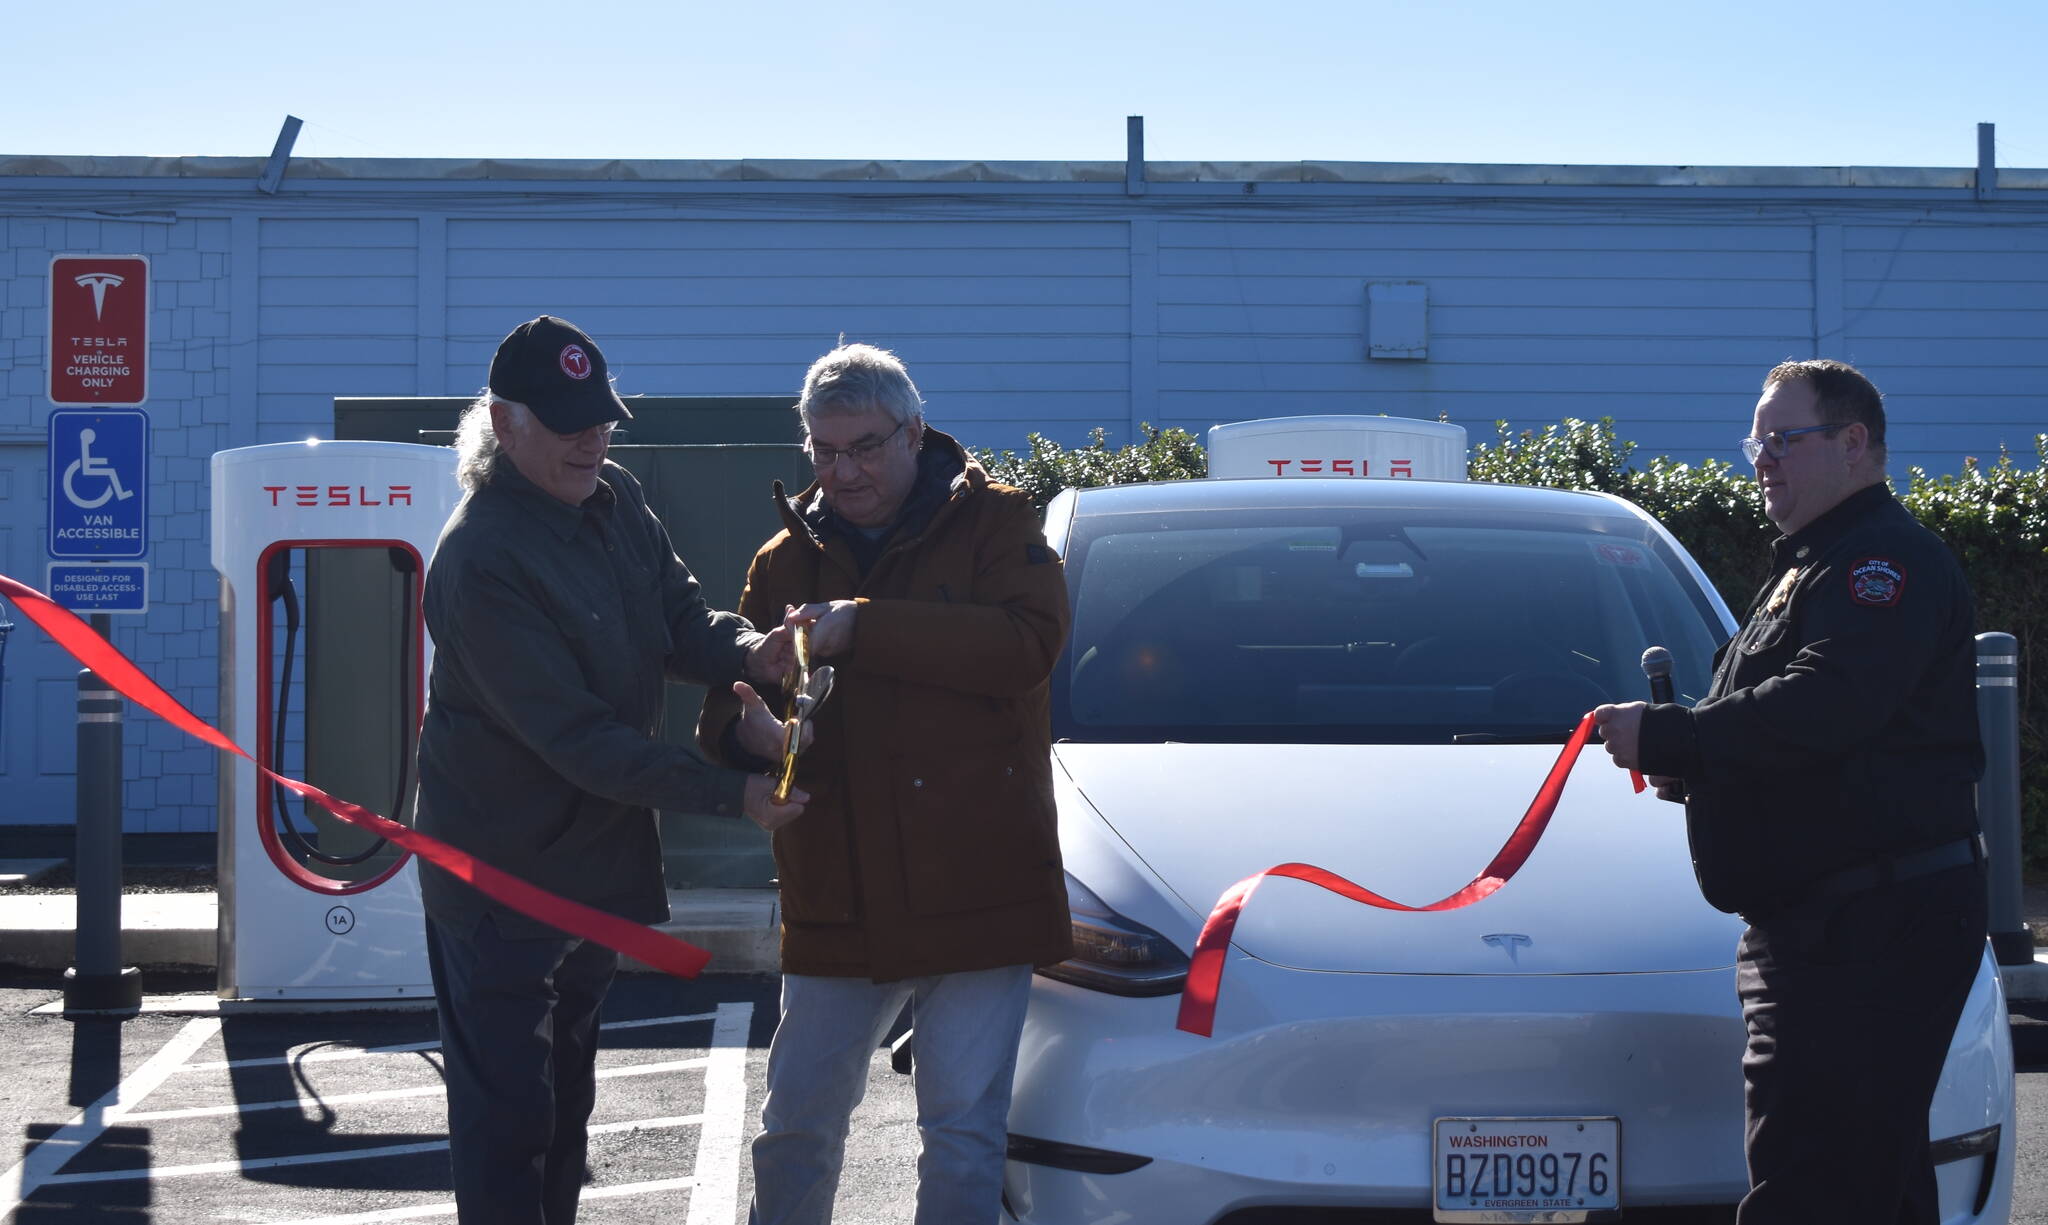 Clayton Franke / The Daily World
From left: Tesla owner Darrel Prowse, Ocean Shores Mayor Jon Martin and Fire Chief Brian Ritter cut the ceremonial ribbon for the Tesla Supercharger station in Ocean Shores on Saturday, Oct. 28.